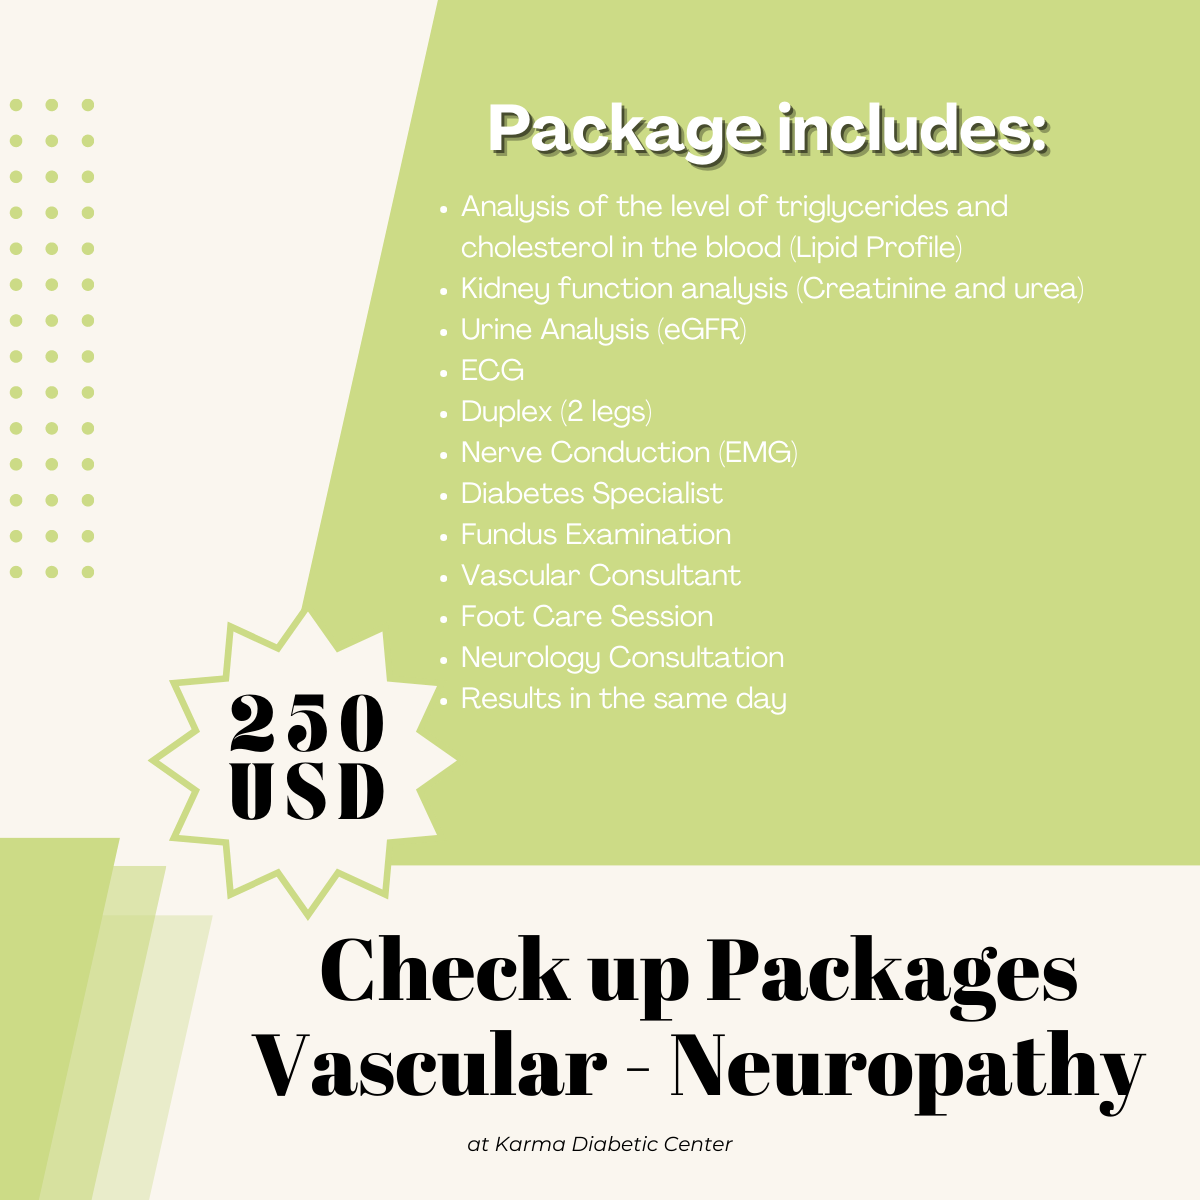 Check up Packages Vascular Neuropathy